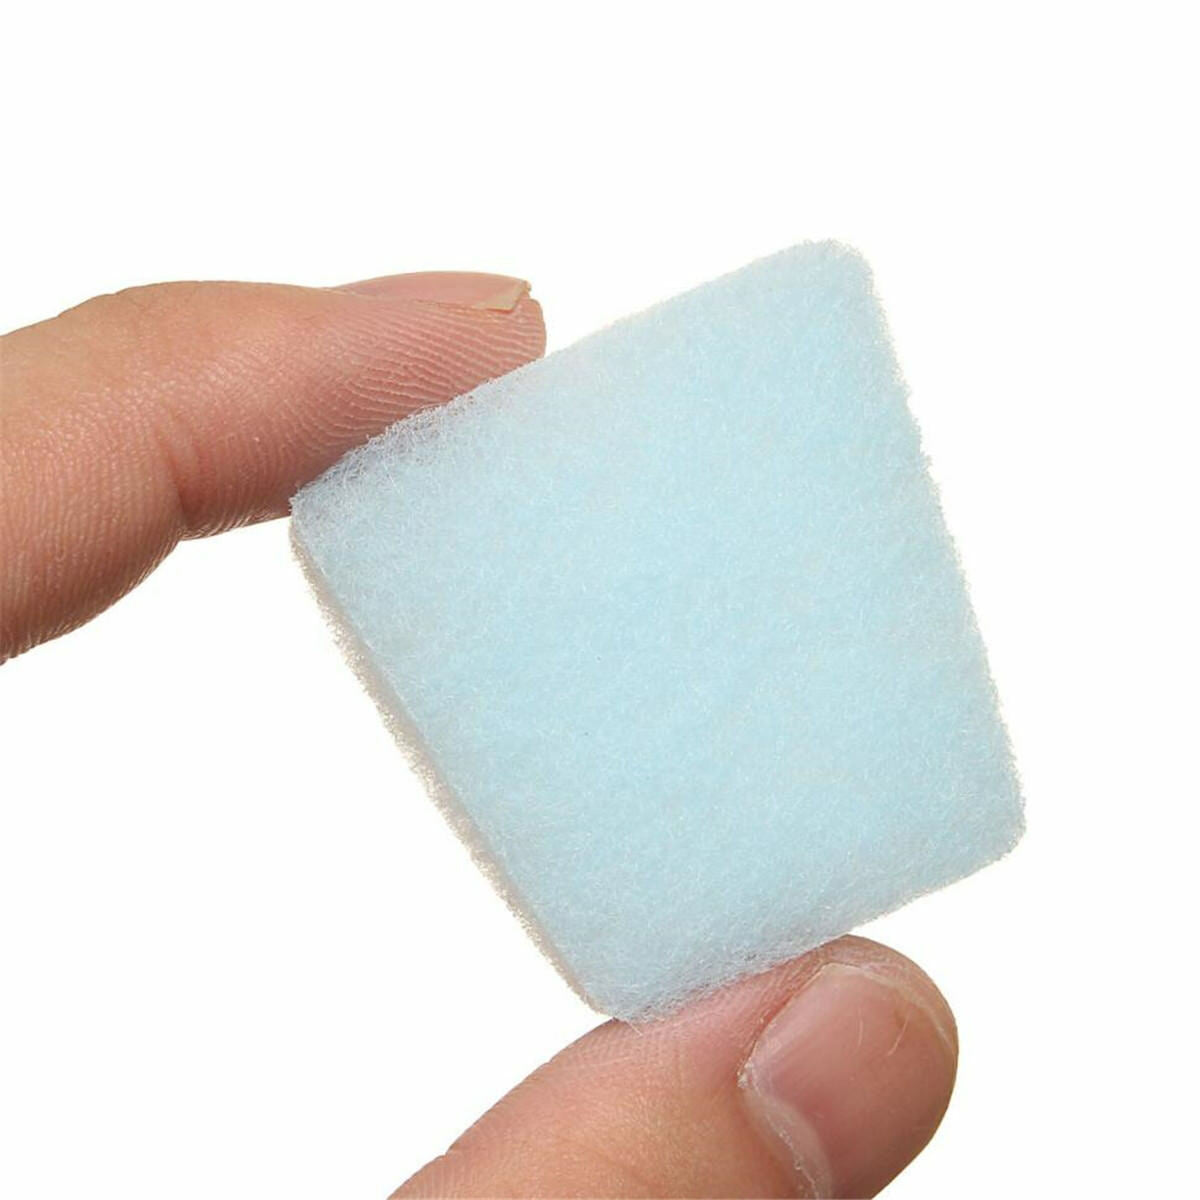 2X Standard Filter Disposable Sponge Hypo Allergenic For ResMed S7 S8 CPAP Sleep